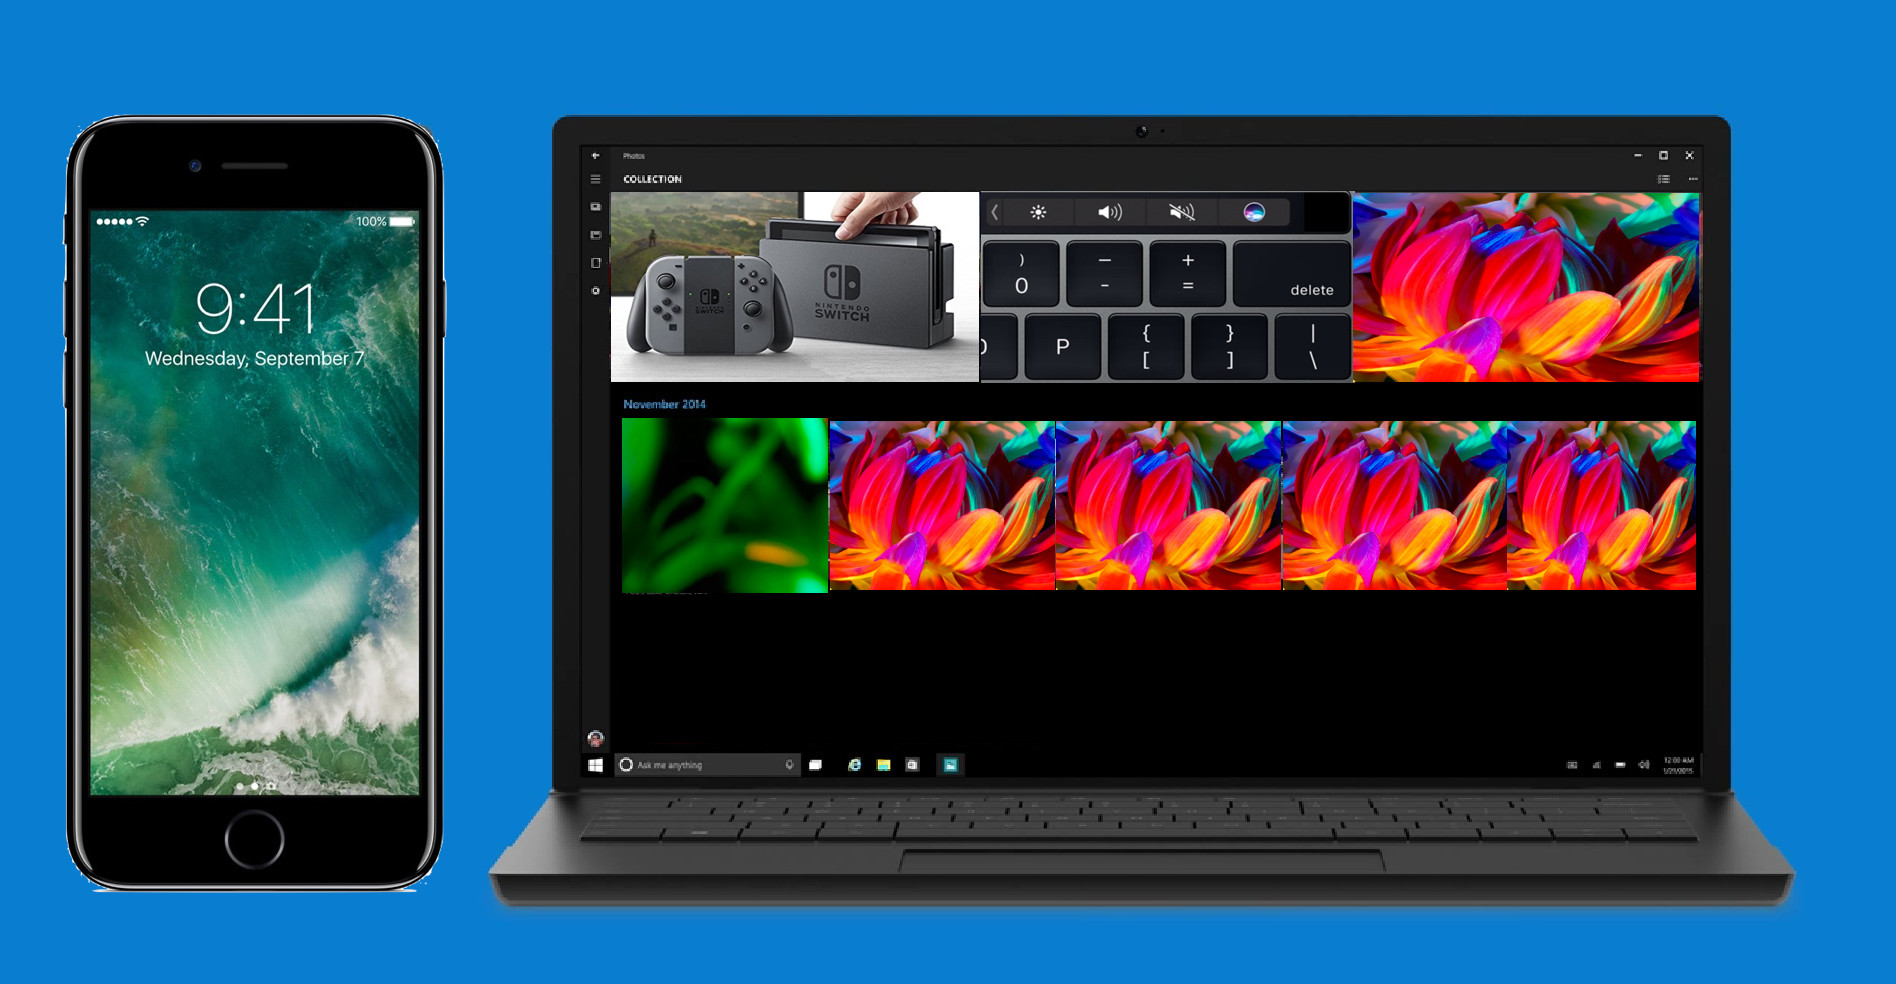 download pictures from iphone to pc windows 10